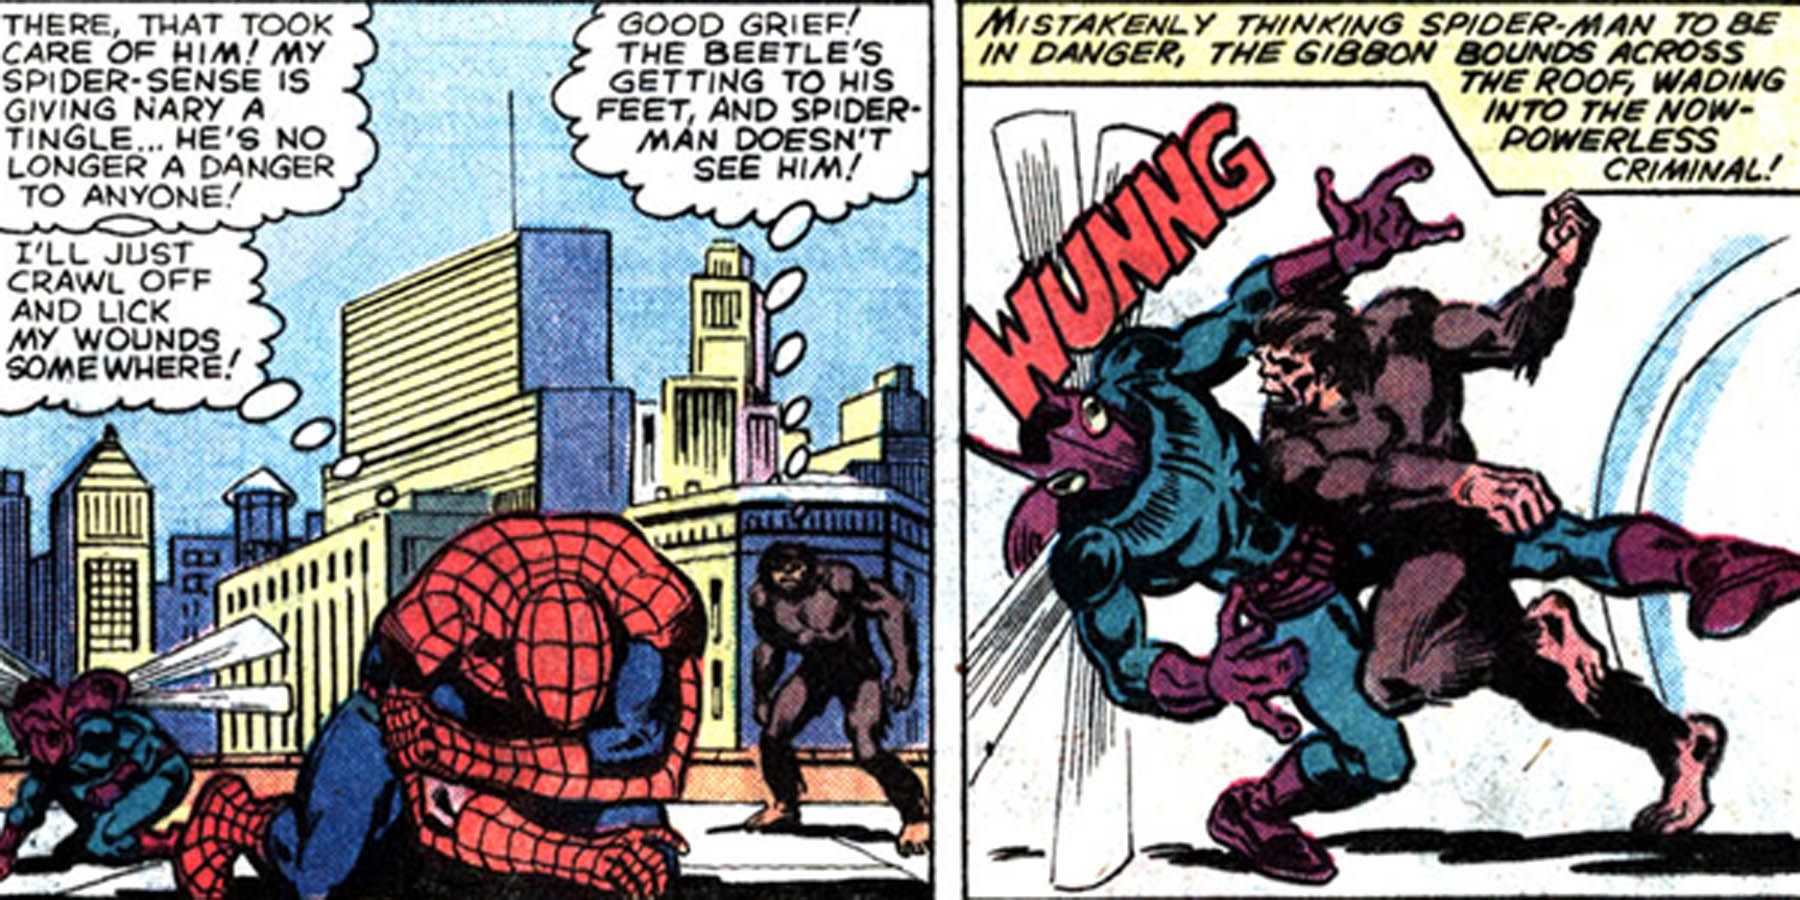 The Gibbon tries to help Spider-Man